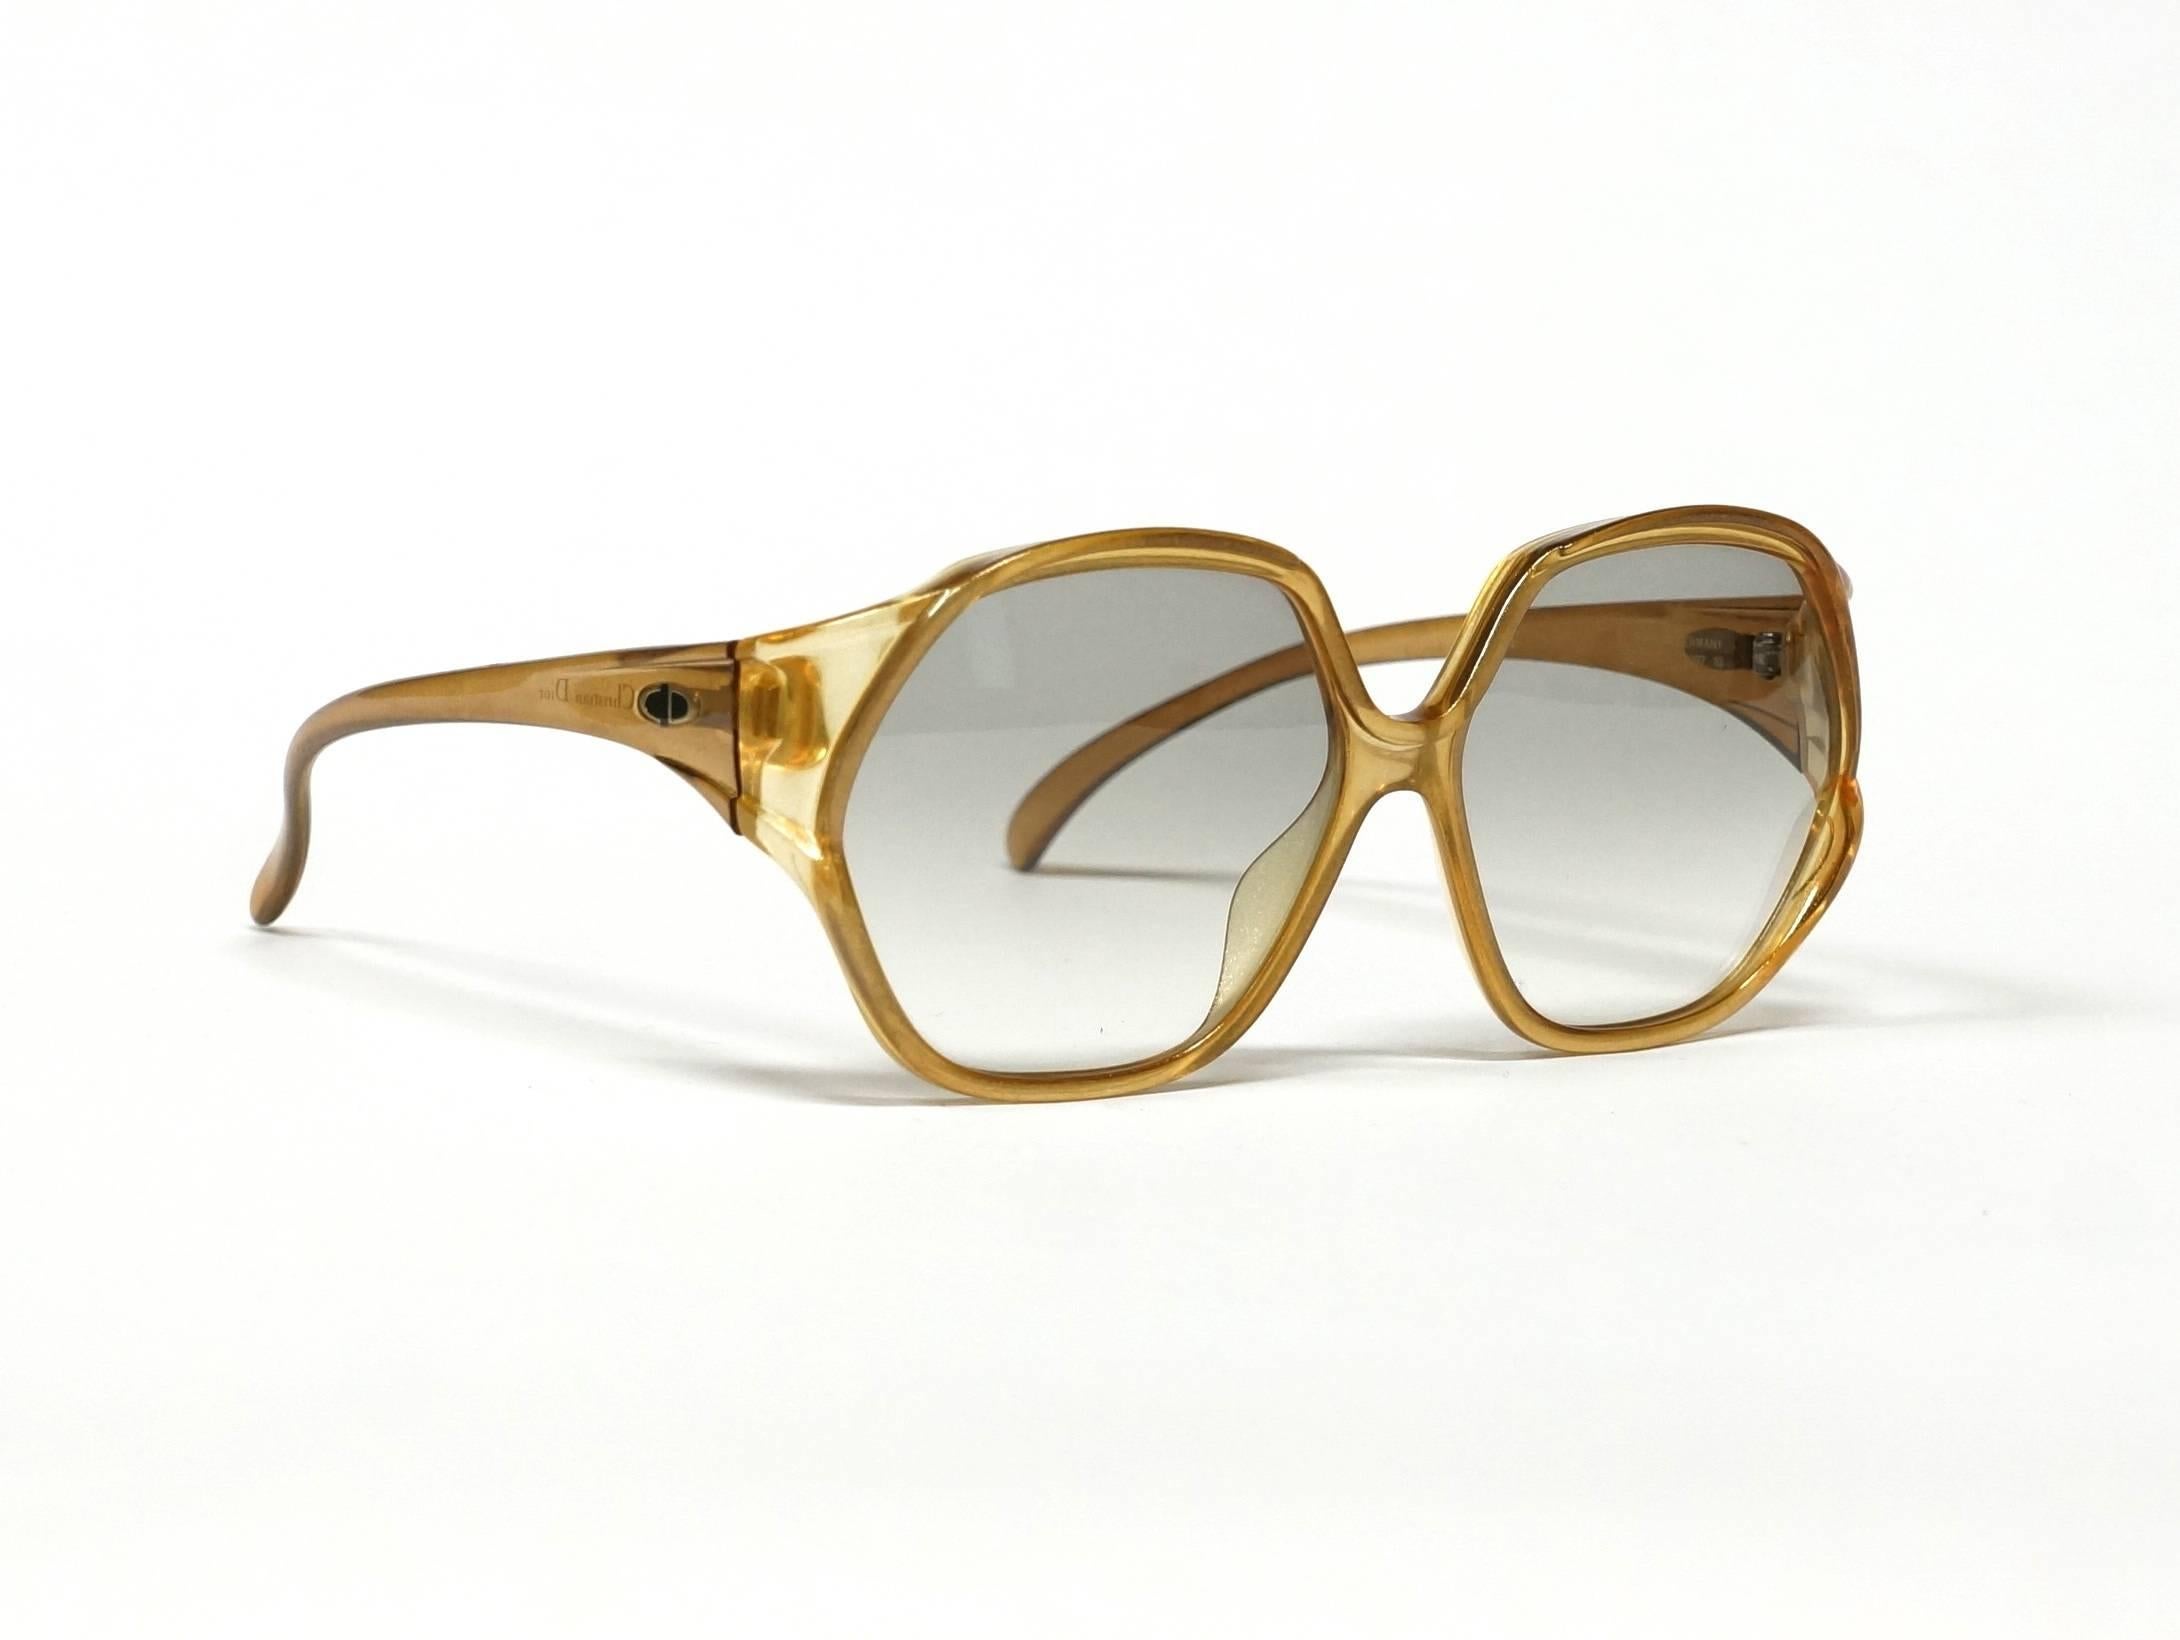 Beige 1970s Dior Oversized Sunglasses in New Old Stock Condition For Sale